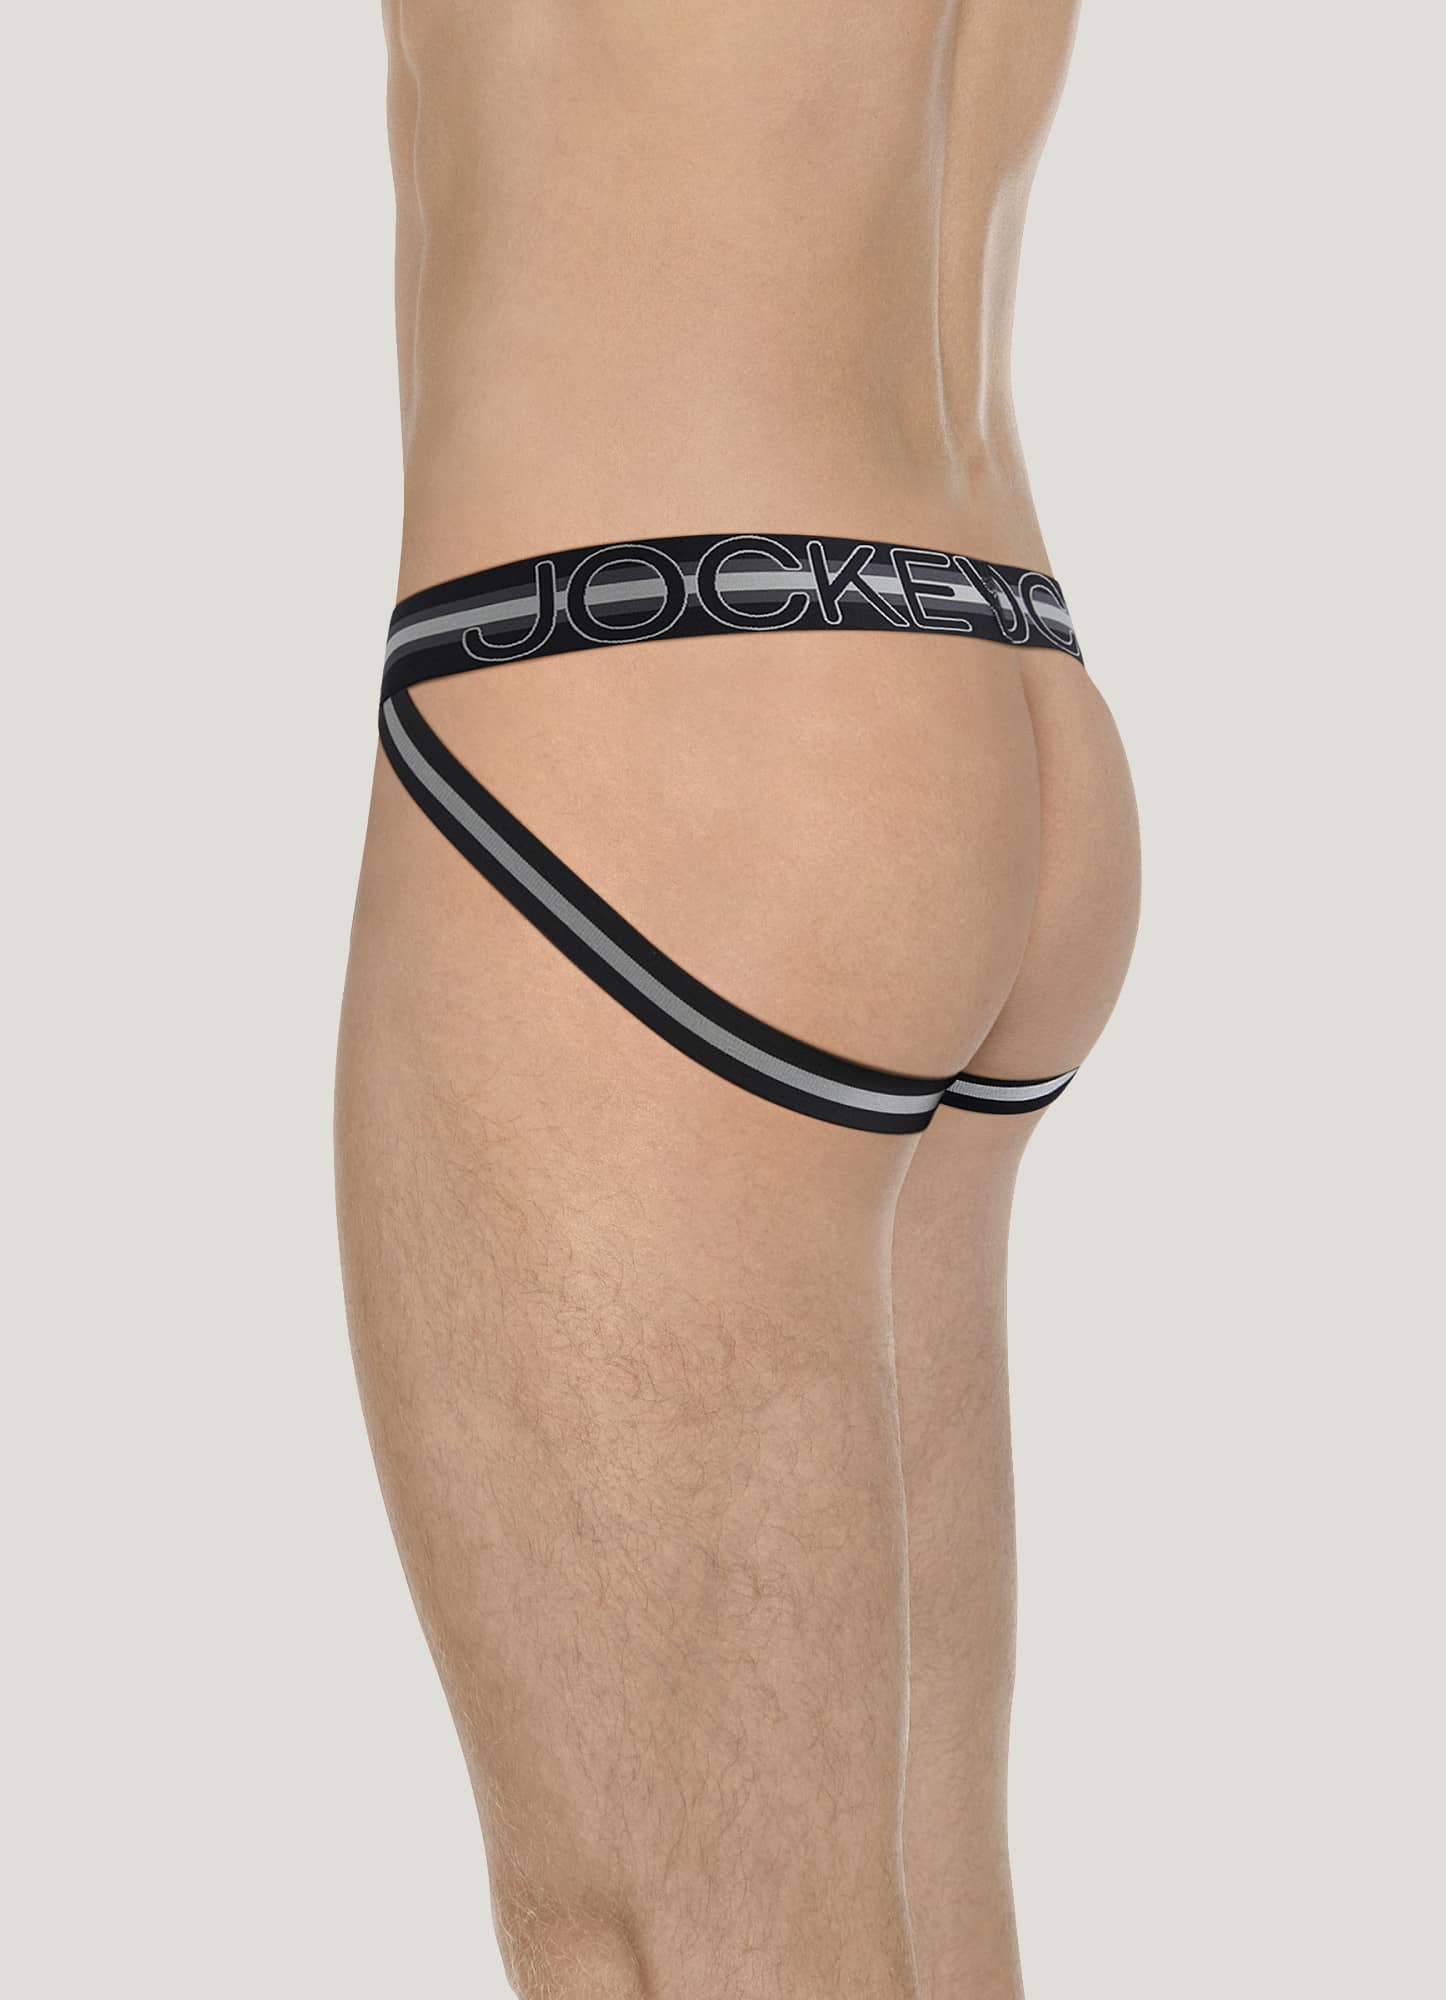 Mens Low Waist V-Shaped Sexy Jockstrap Athletic Sports Lingerie Thong  Underwear Black at  Men's Clothing store